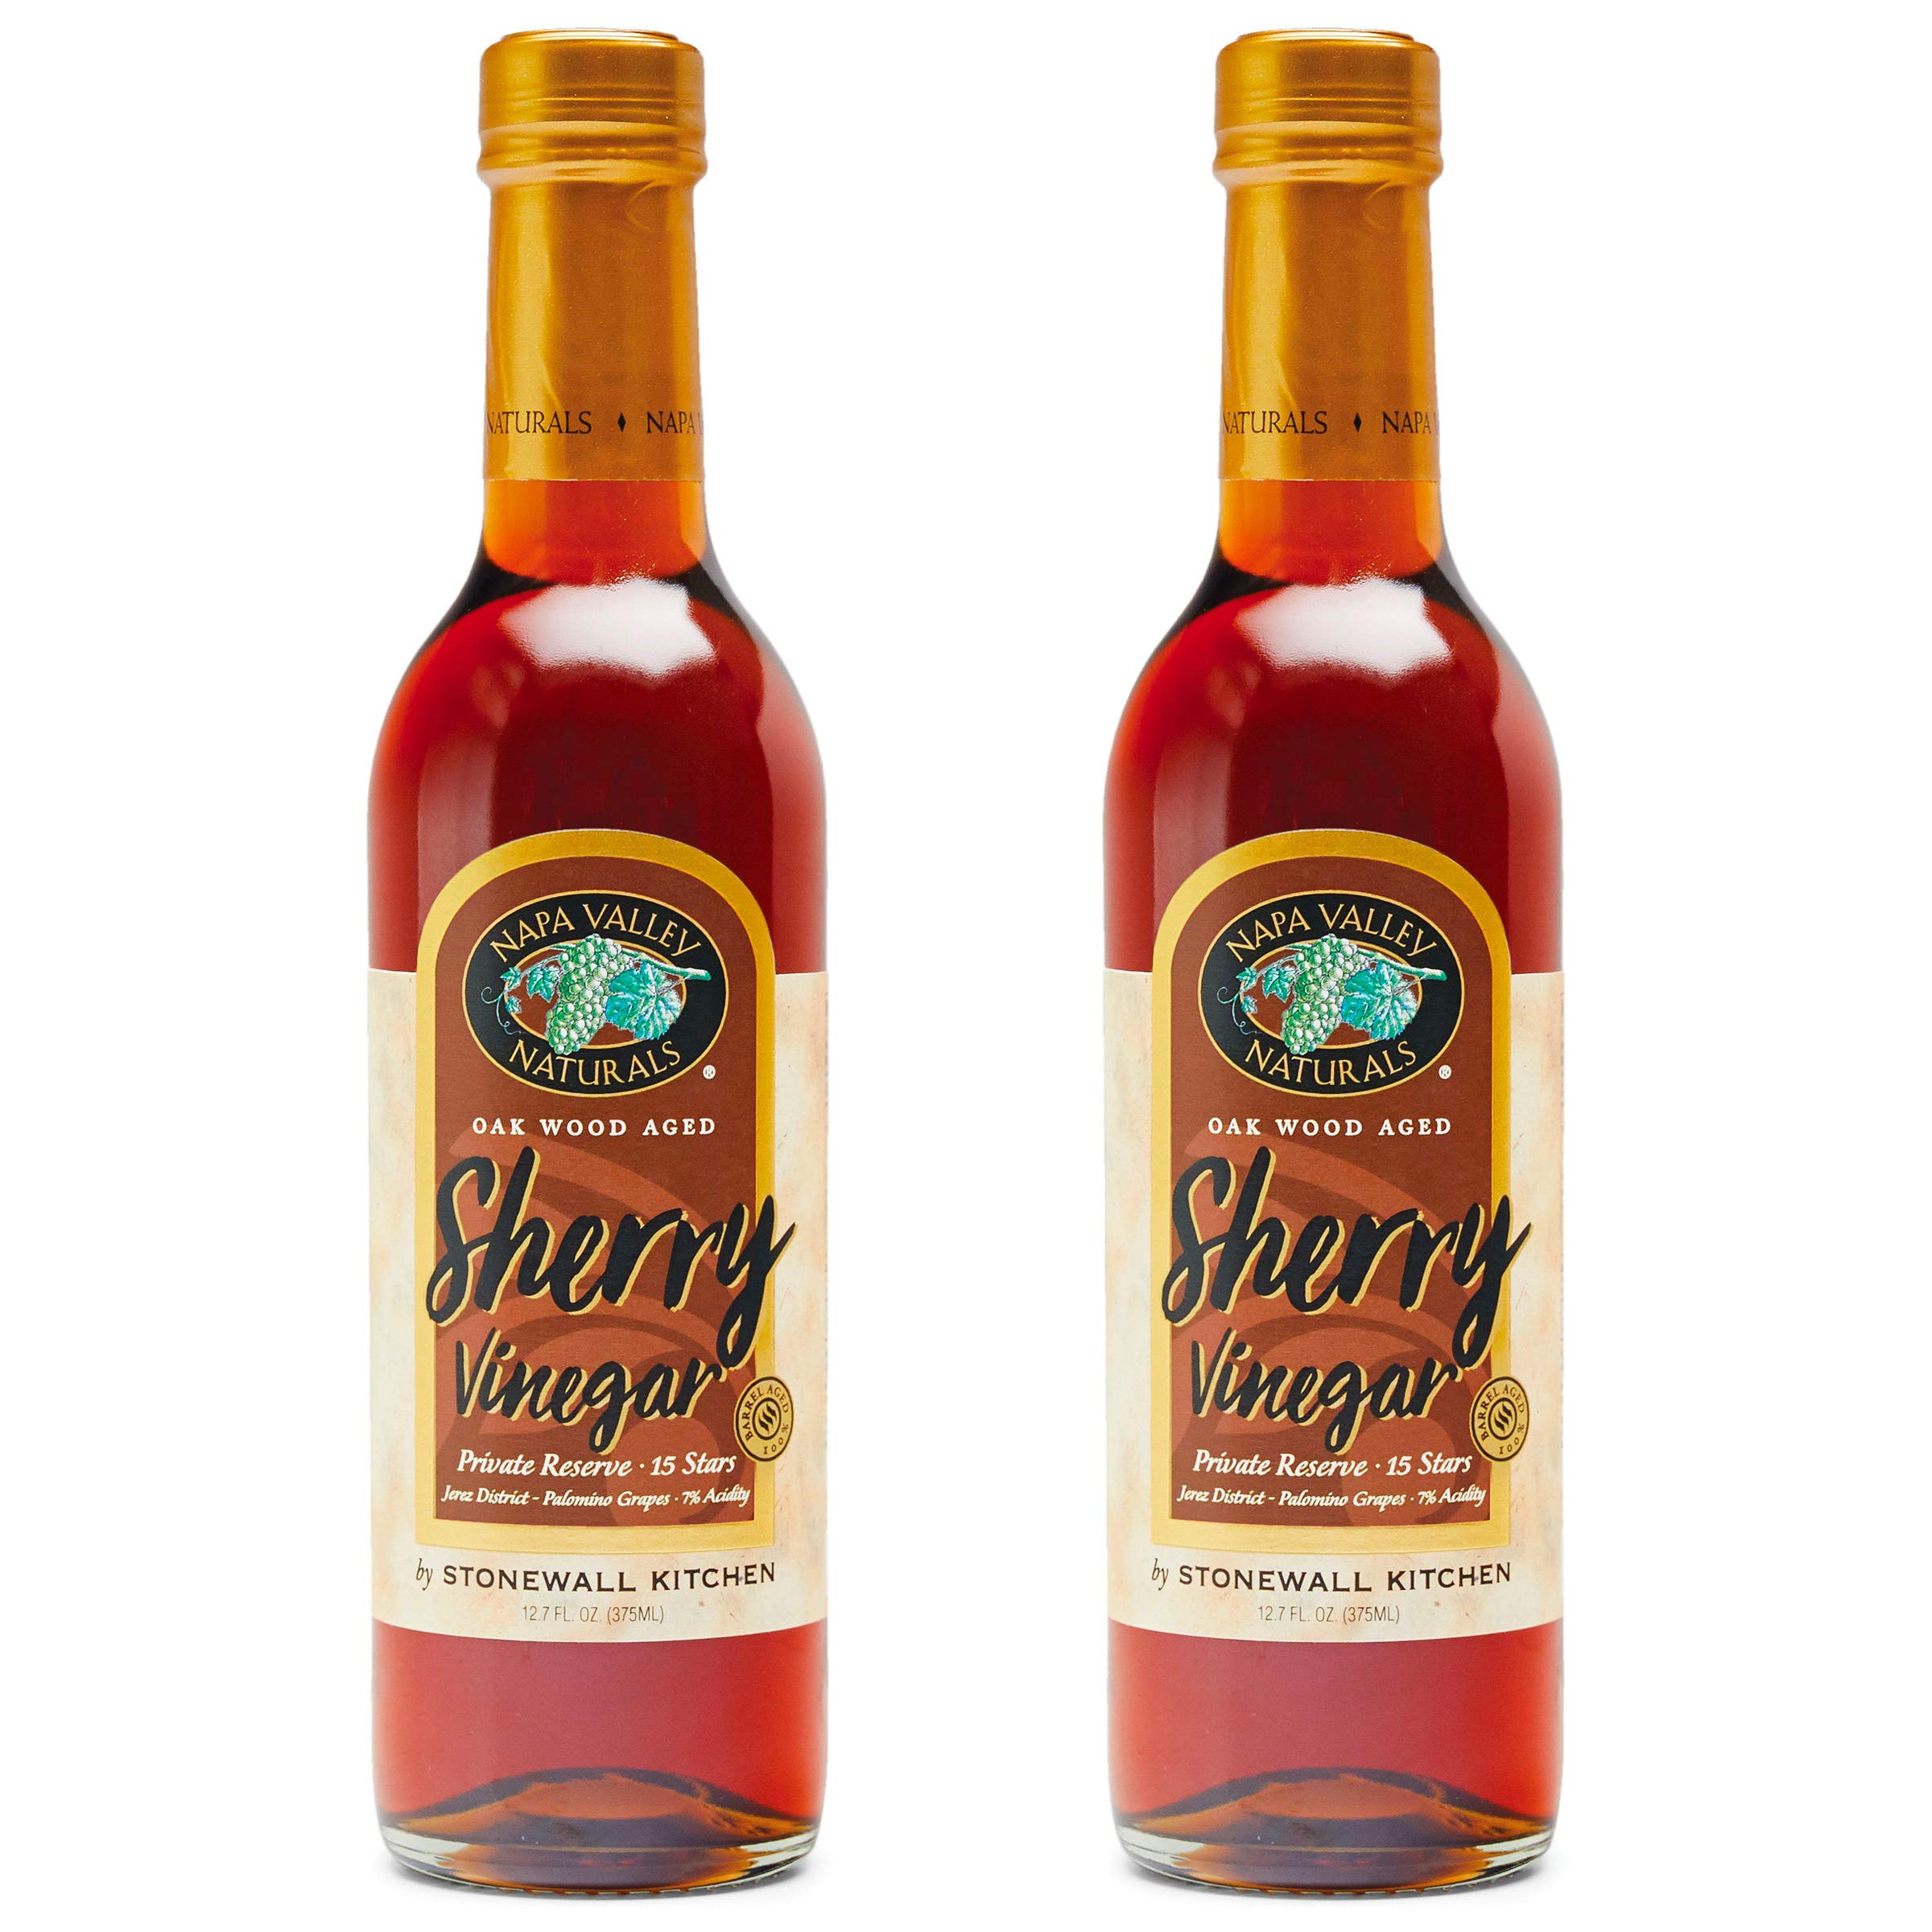 is sherry vinegar halal in the United States?